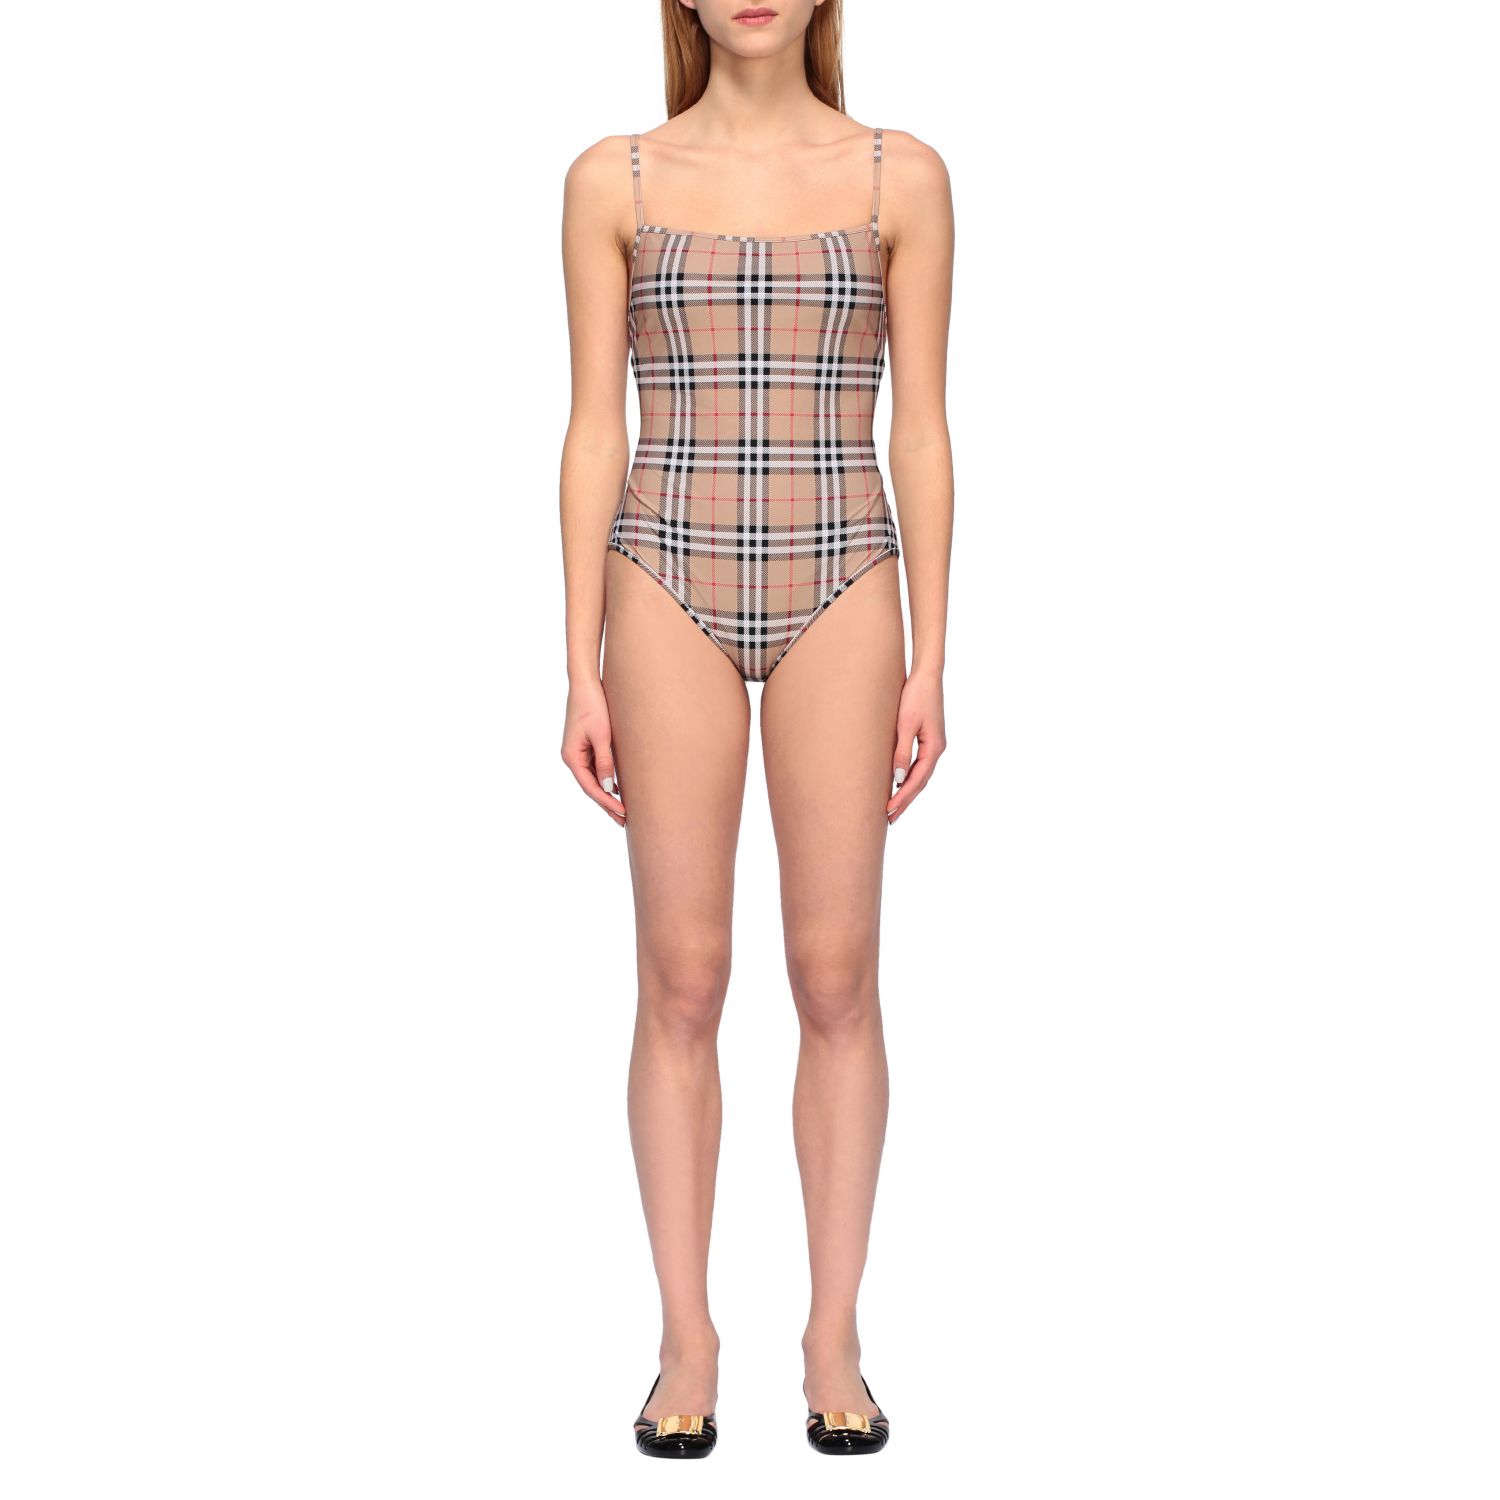 burberry one piece bathing suit